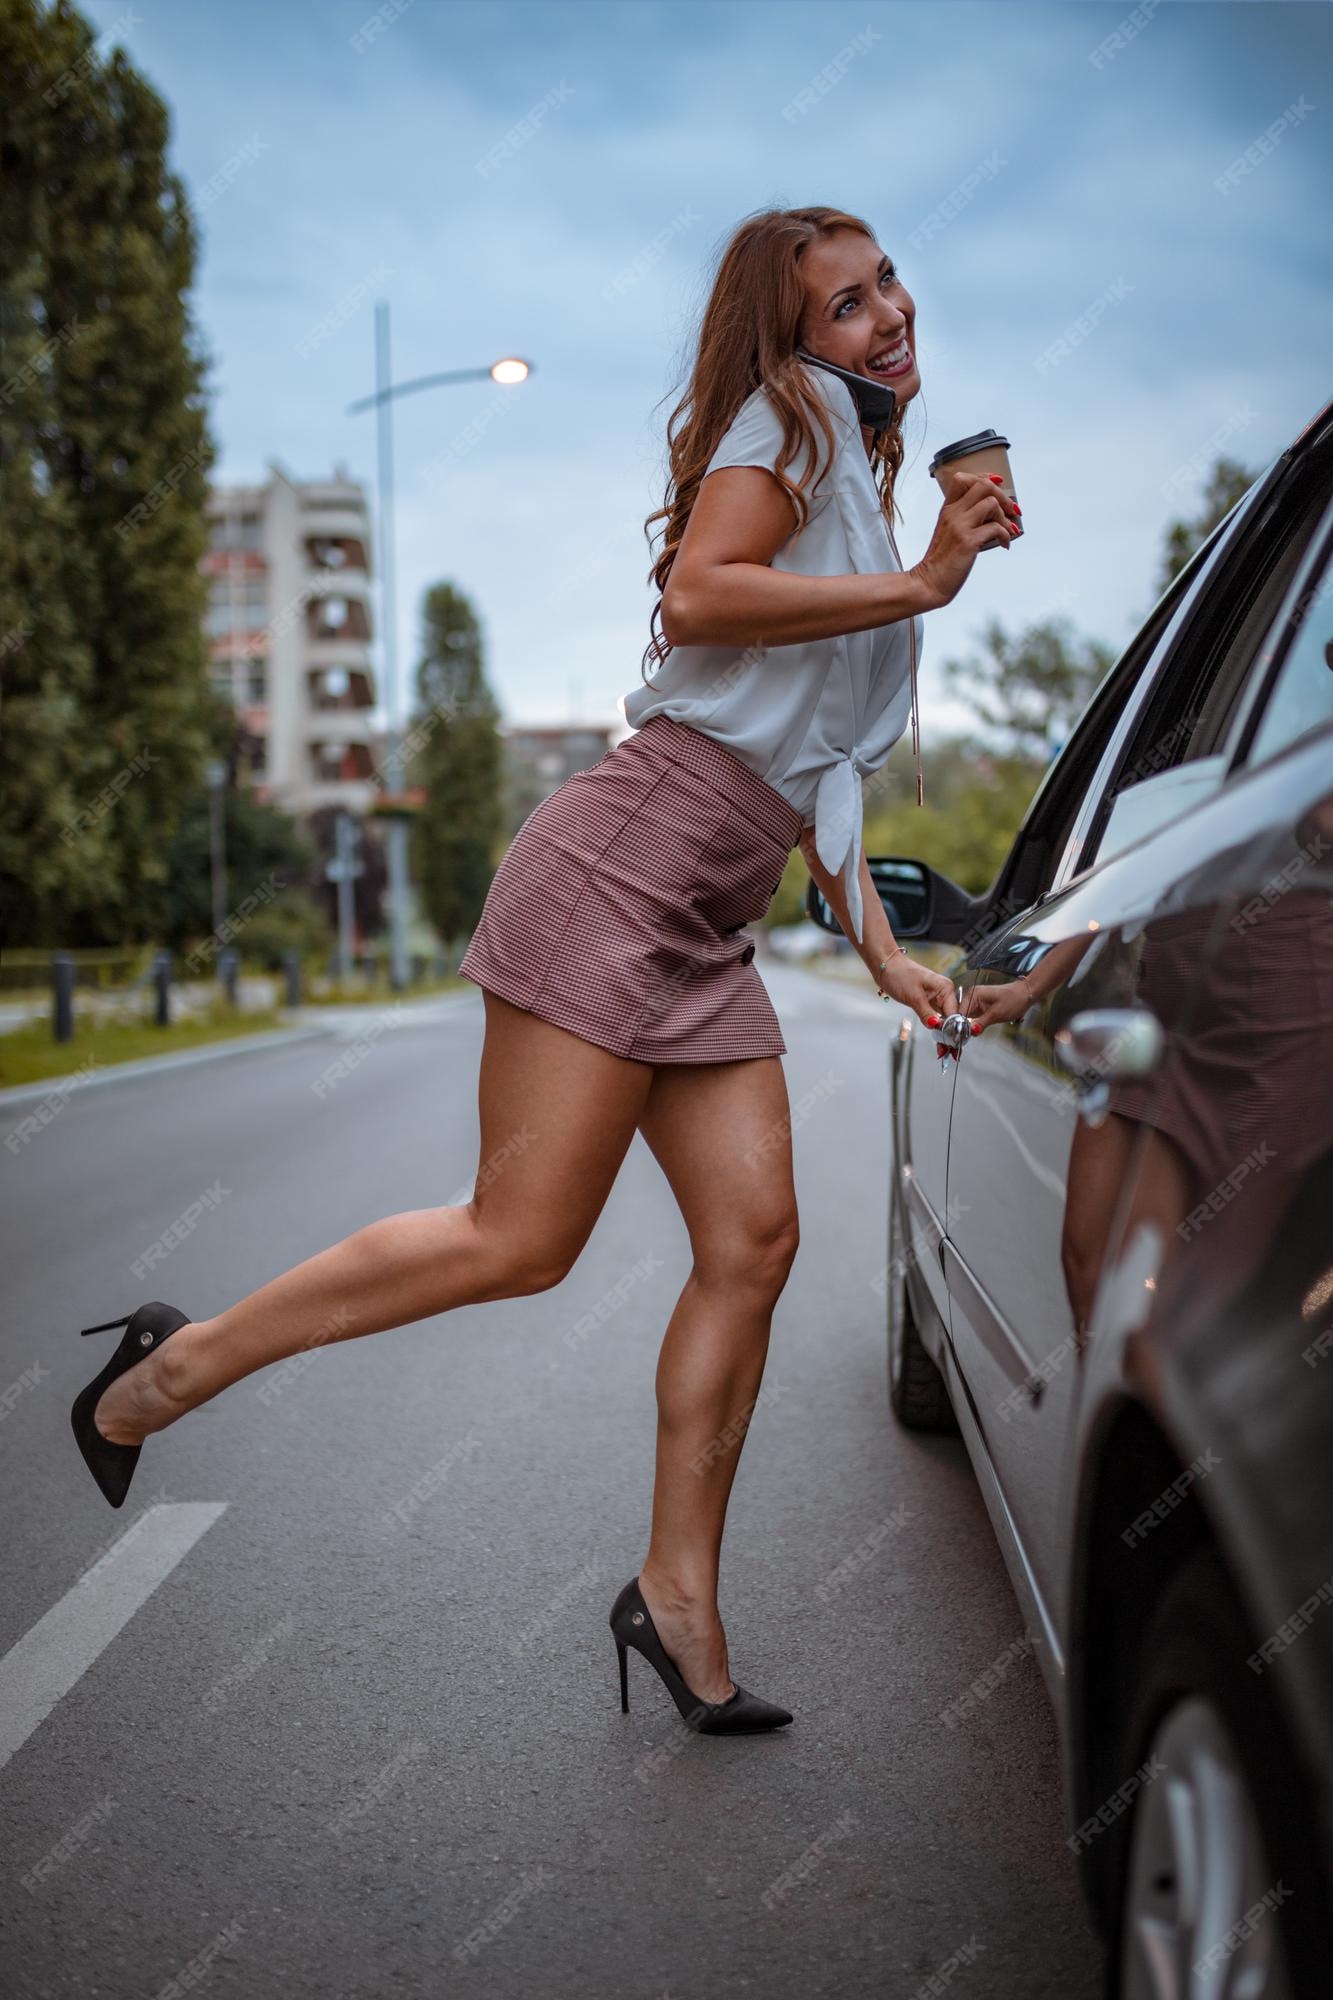 catalina pirvu recommends short skirts and cars pic